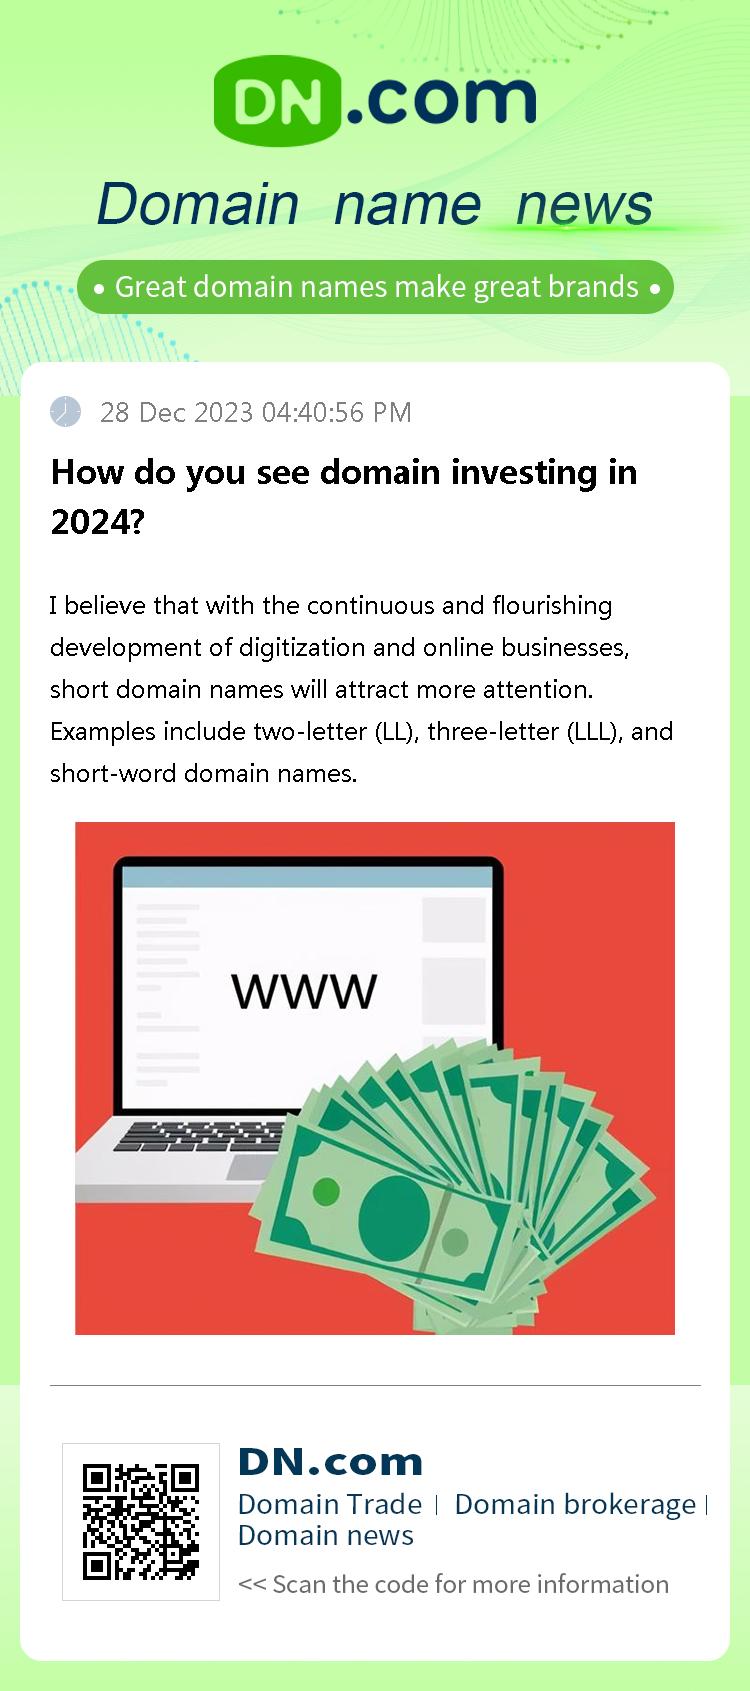 How do you see domain investing in 2024?